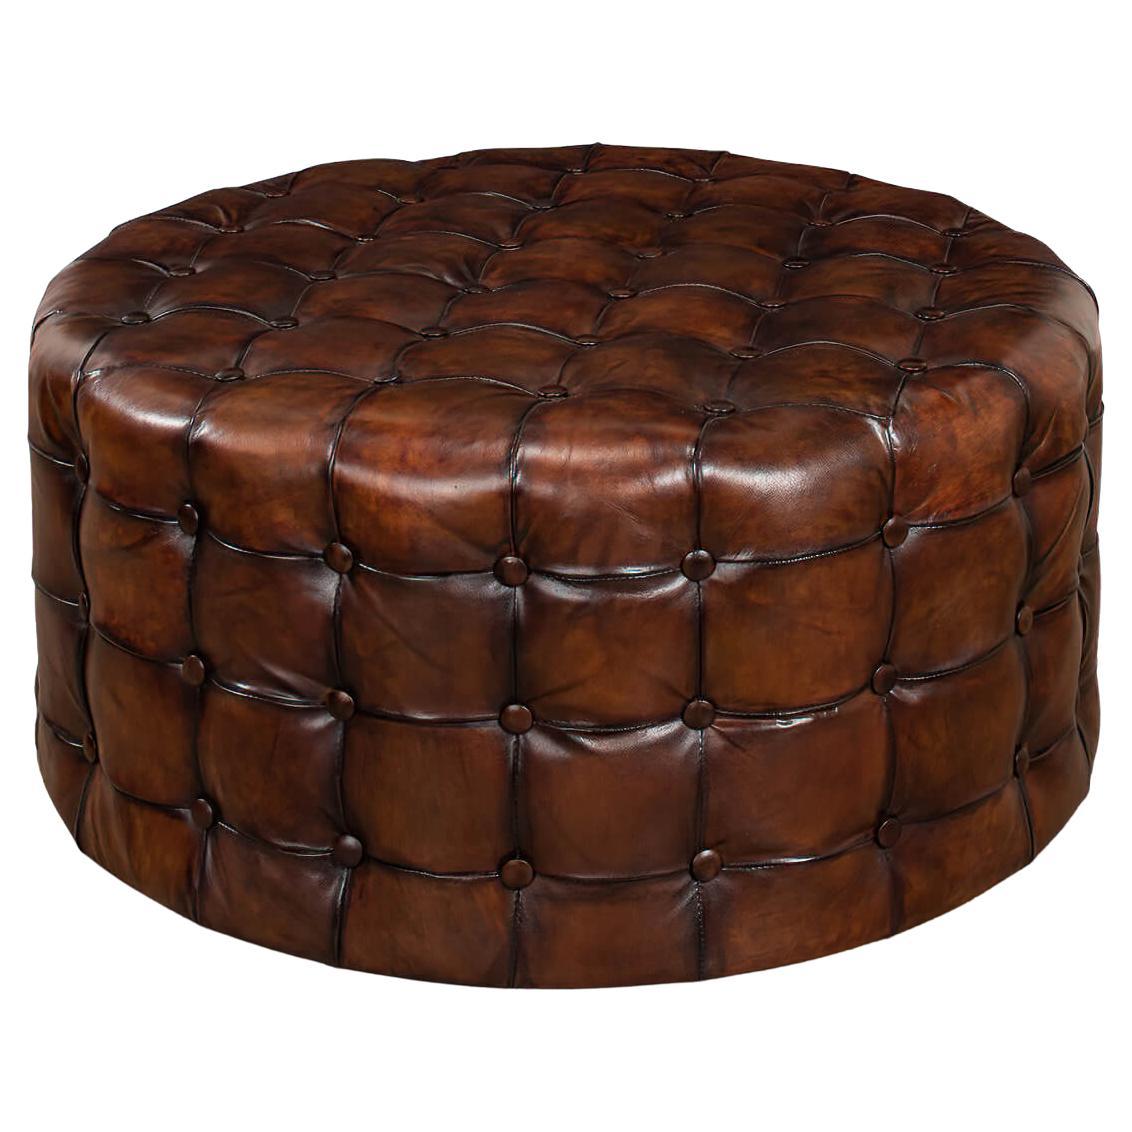 Tufted Leather Round Ottoman